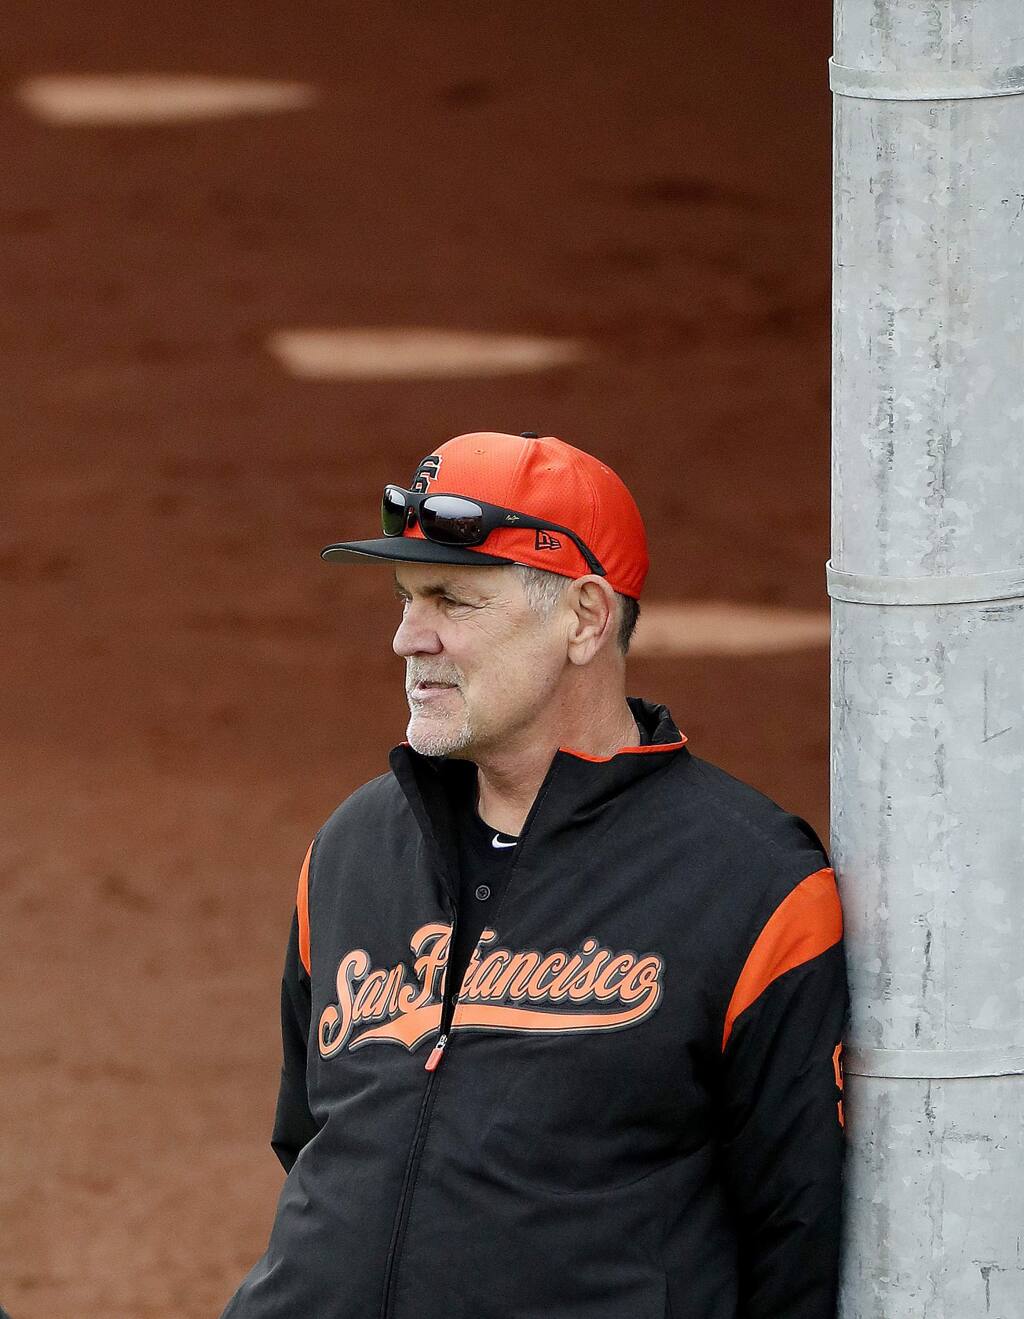 Giants' Bruce Bochy Bidding Farewell After 3 Titles and Much More - The New  York Times